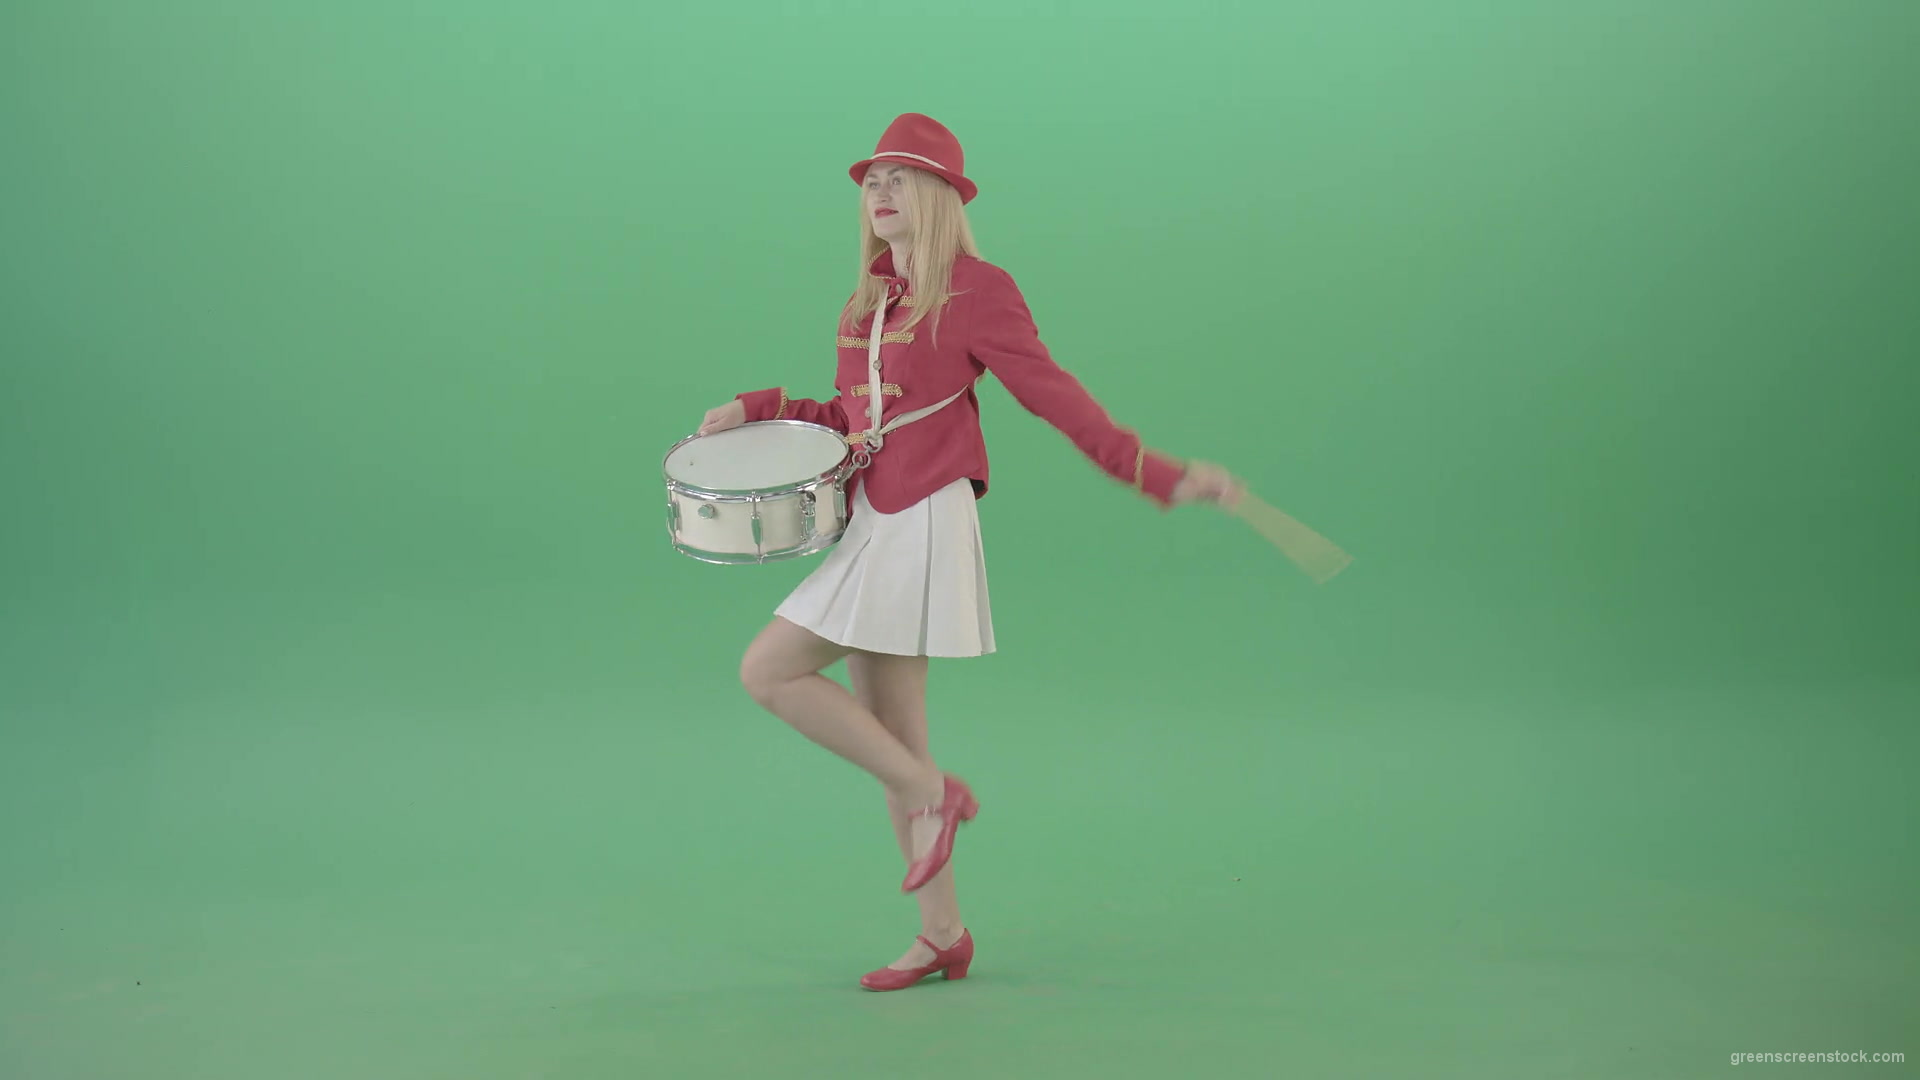 Red-Costume-Girl-in-Side-view-marching-on-green-screen-and-playing-snare-drum-4K-Video-Footage-1920_002 Green Screen Stock